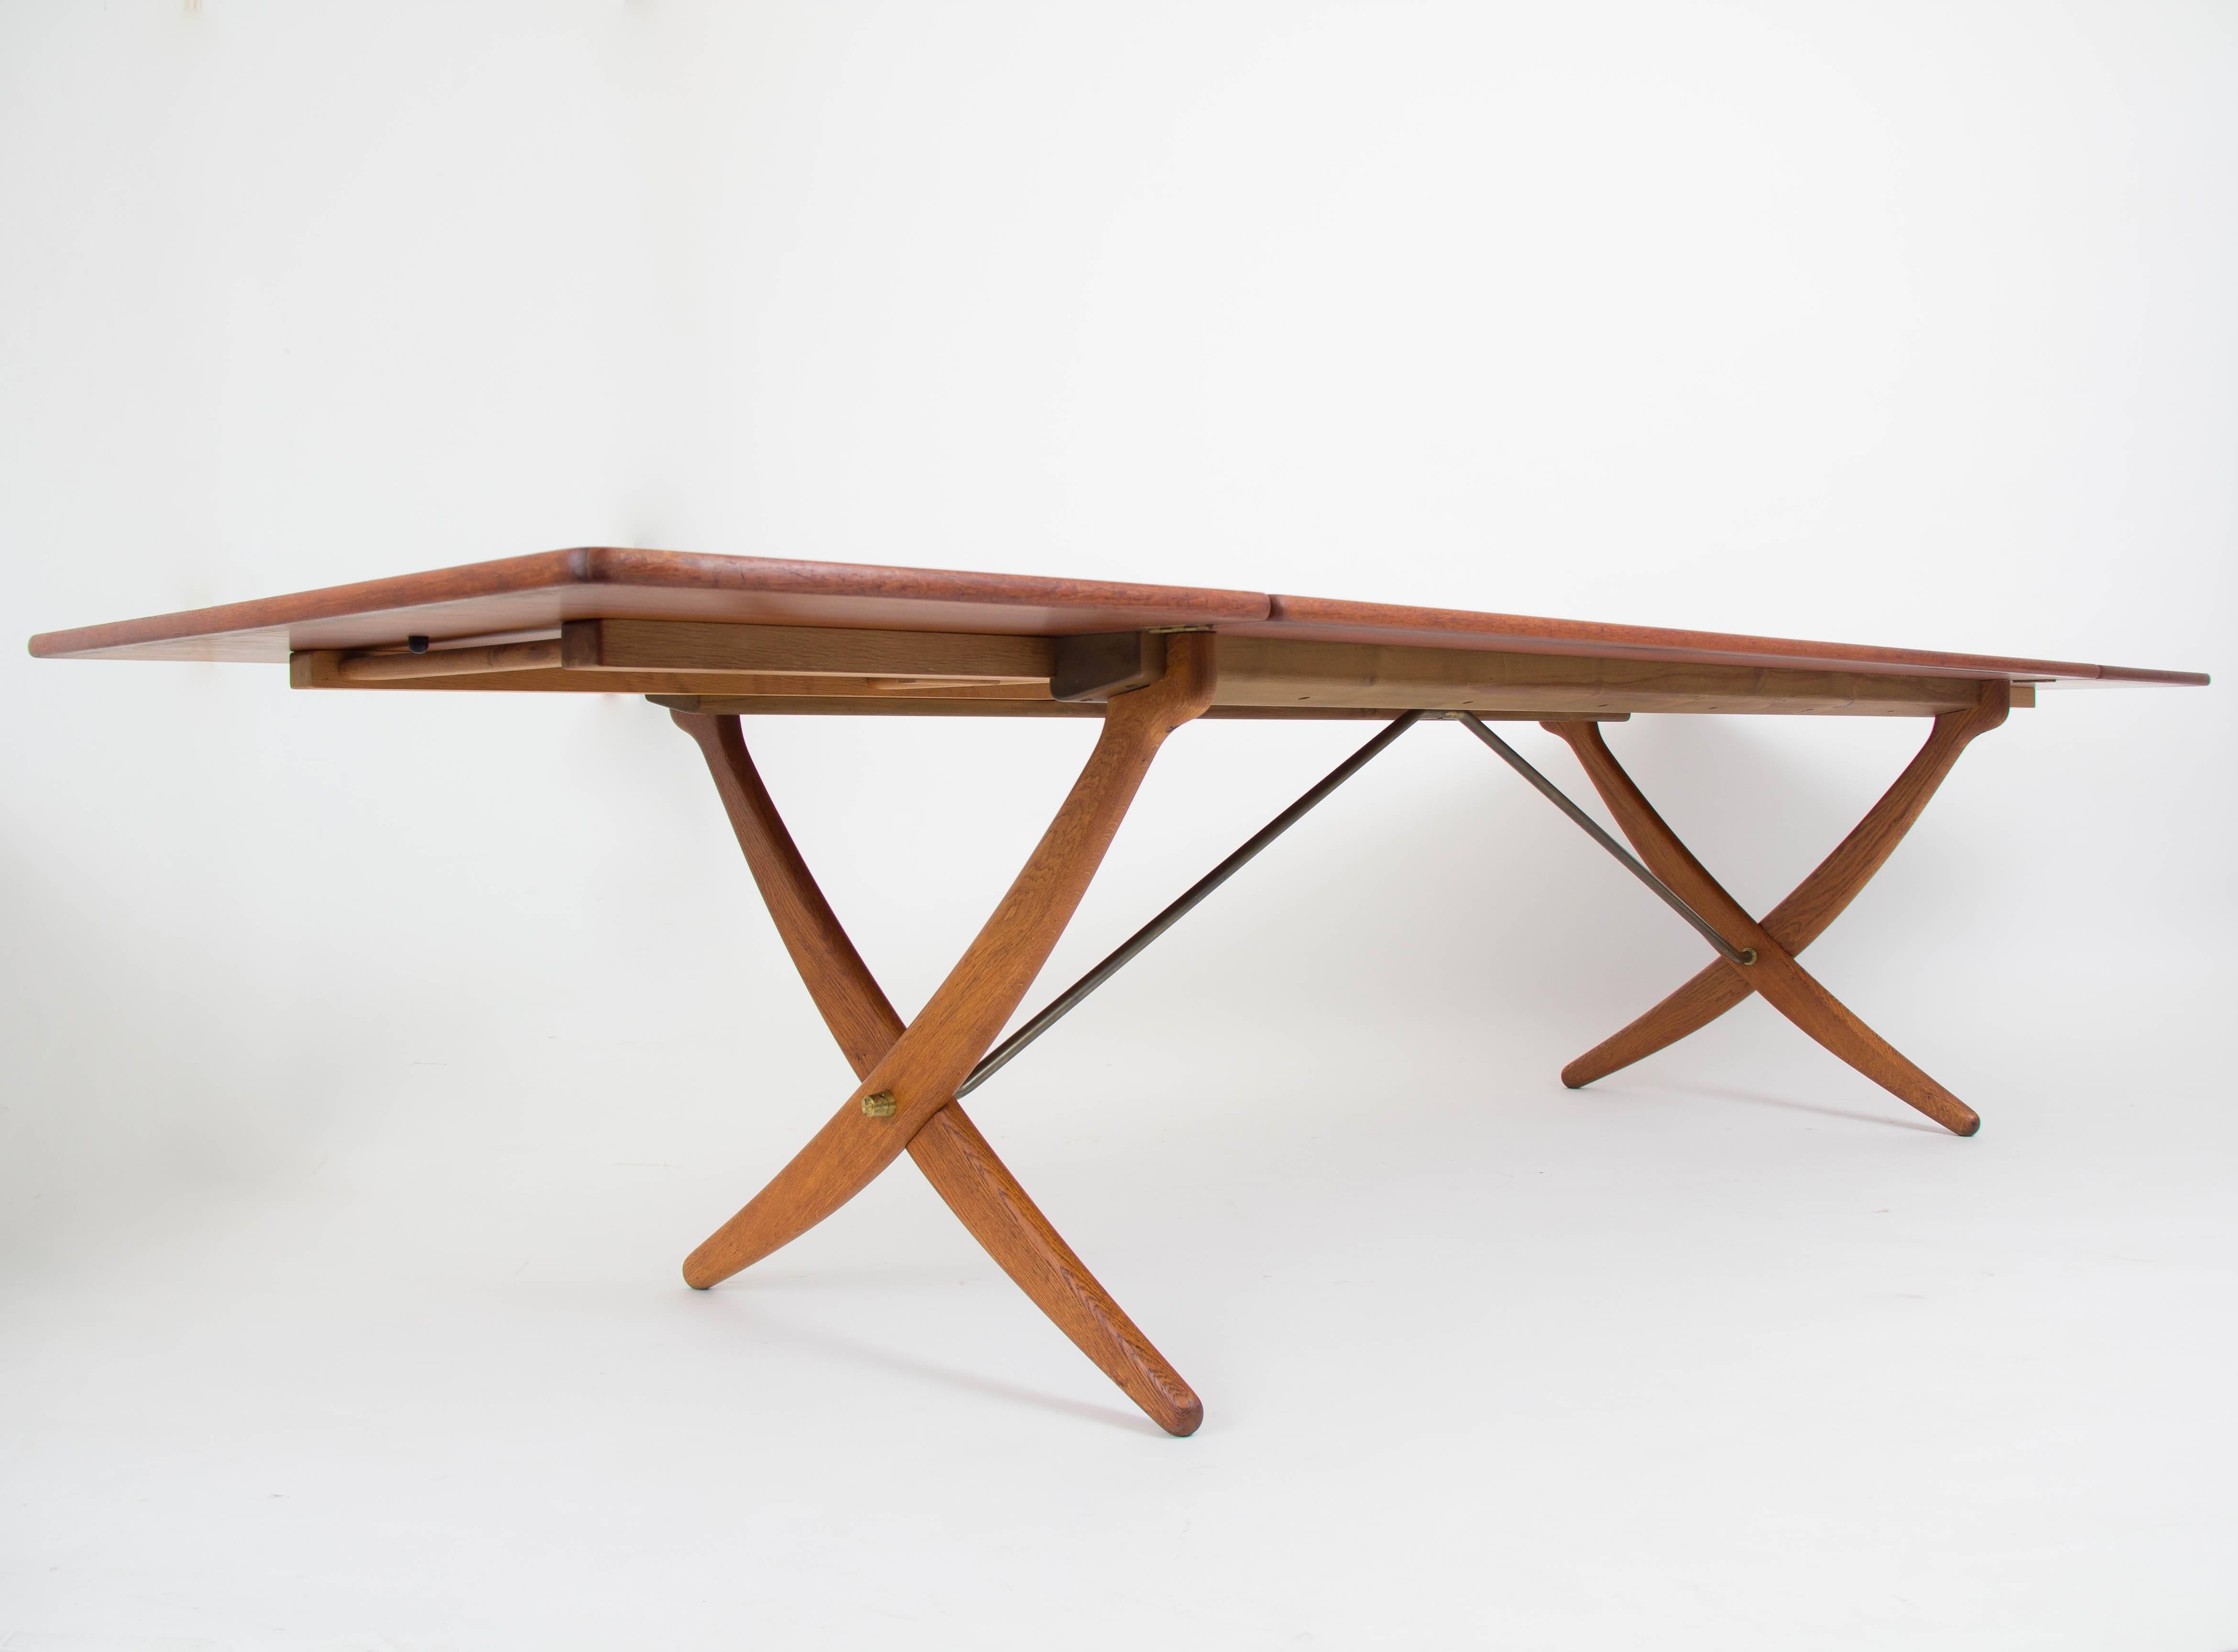 Hans Wegner’s AT-314 dining table by Andreas Tuck has two drop leaves and a distinctive crossed sabre legs.  The generous tabletop is teak, with edging in solid teak framing the top and leaves.  A wooden bar pulls out to support the leaves. The